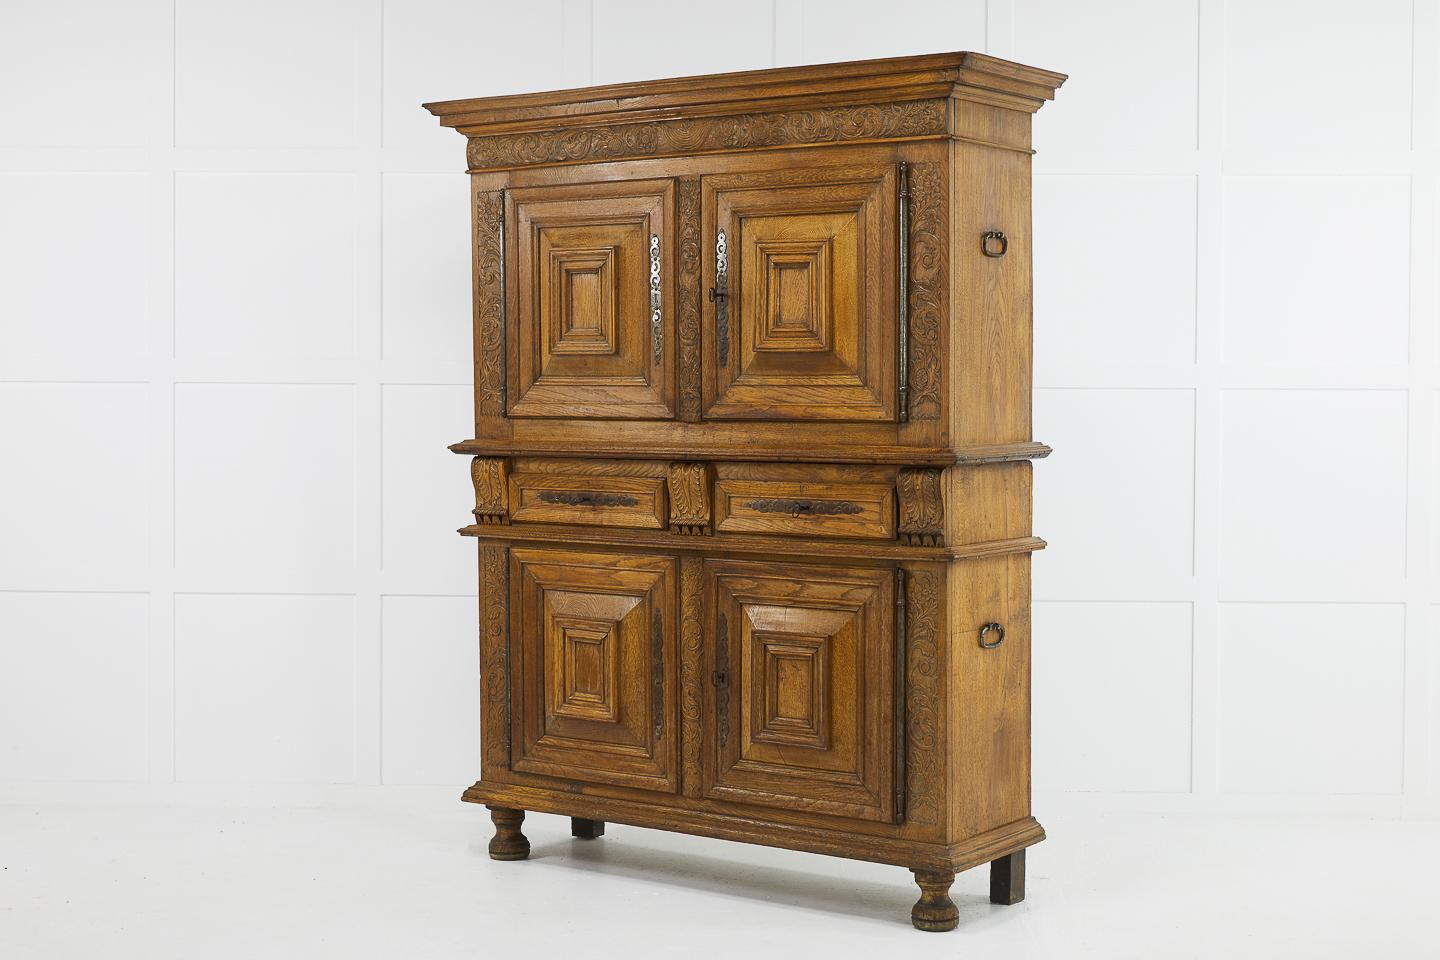 Flemish 17th century carved oak cabinet. Small and nicely proportioned.